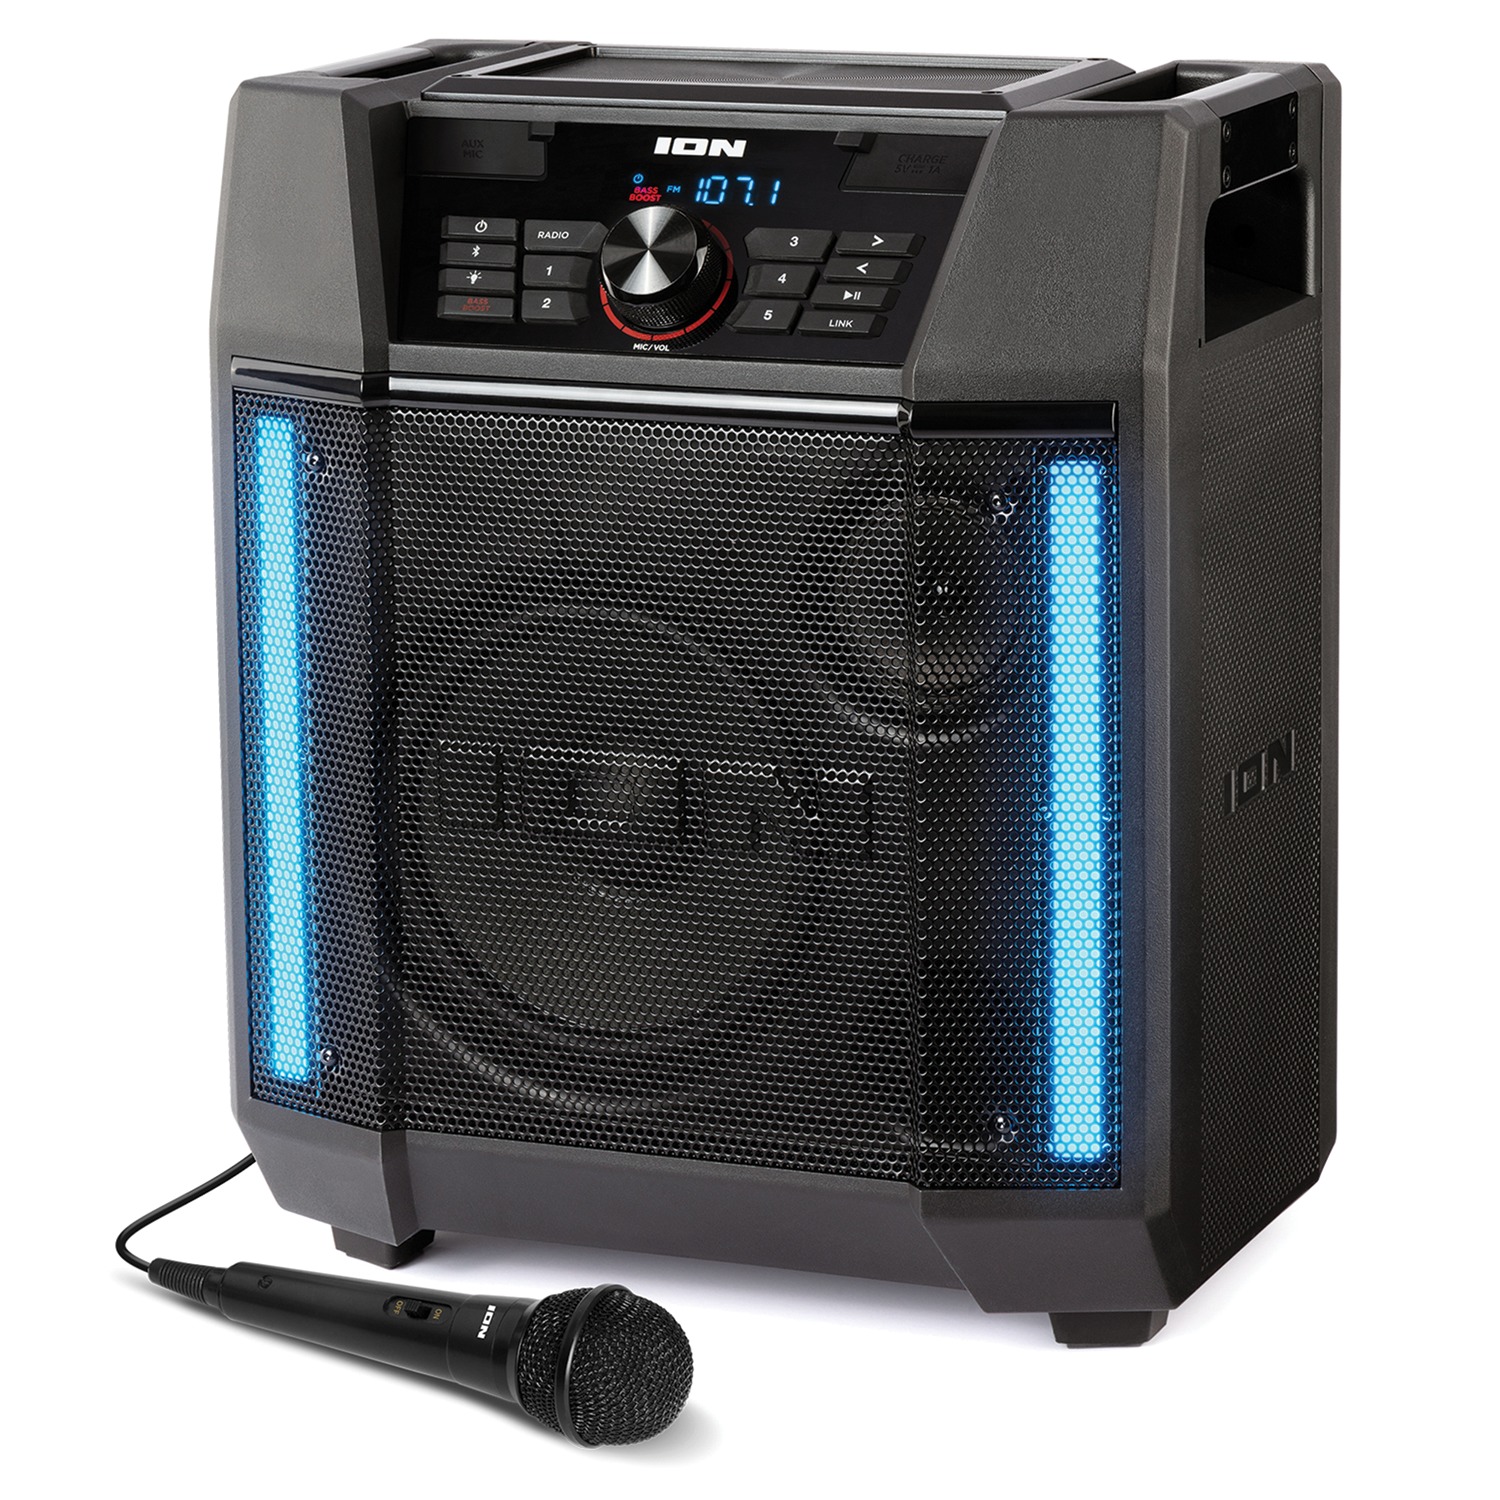 ION IPA131 Adventurer 8-Inch 100-Watt Portable Weather-Resistant Bluetooth PA Speaker with Light Bars and Microphone - image 1 of 5